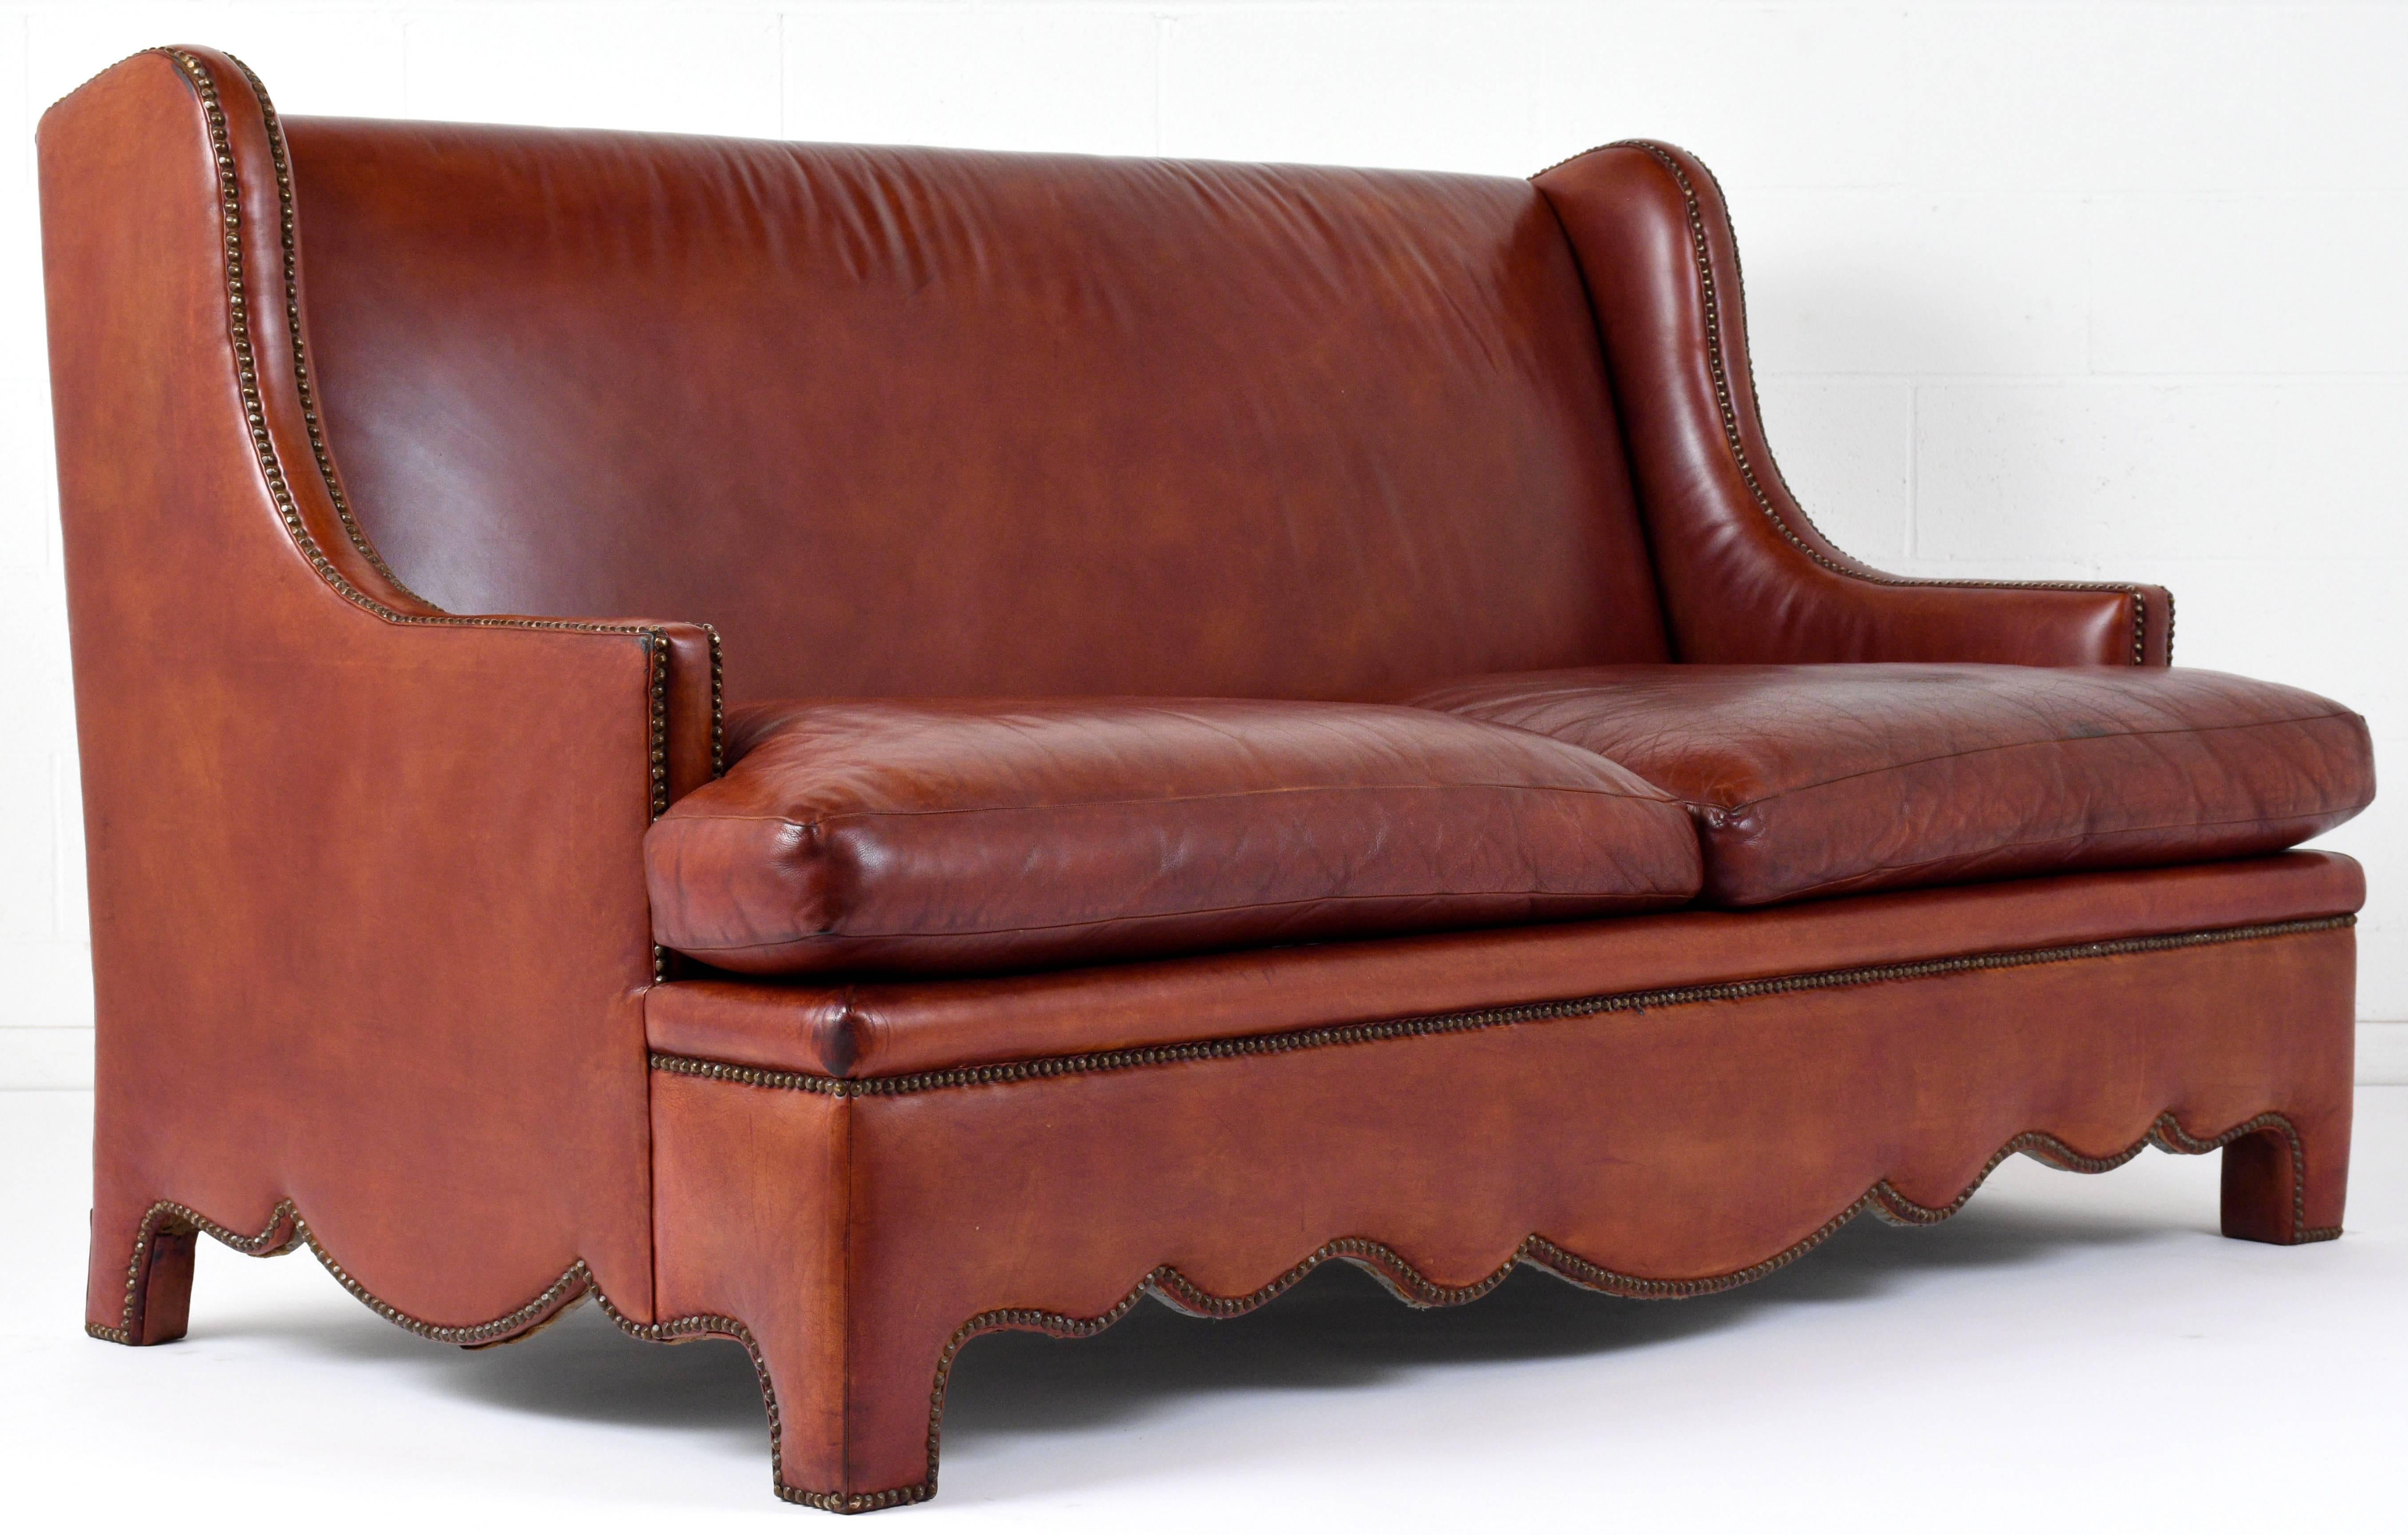 This 1970s vintage Regency-style sofa is fully upholstered in the original leather in a tan color. The high back seat with curved arms and the scalloped bottom edges have nailhead trim decoration. The seat has two loose cushions with comfortable